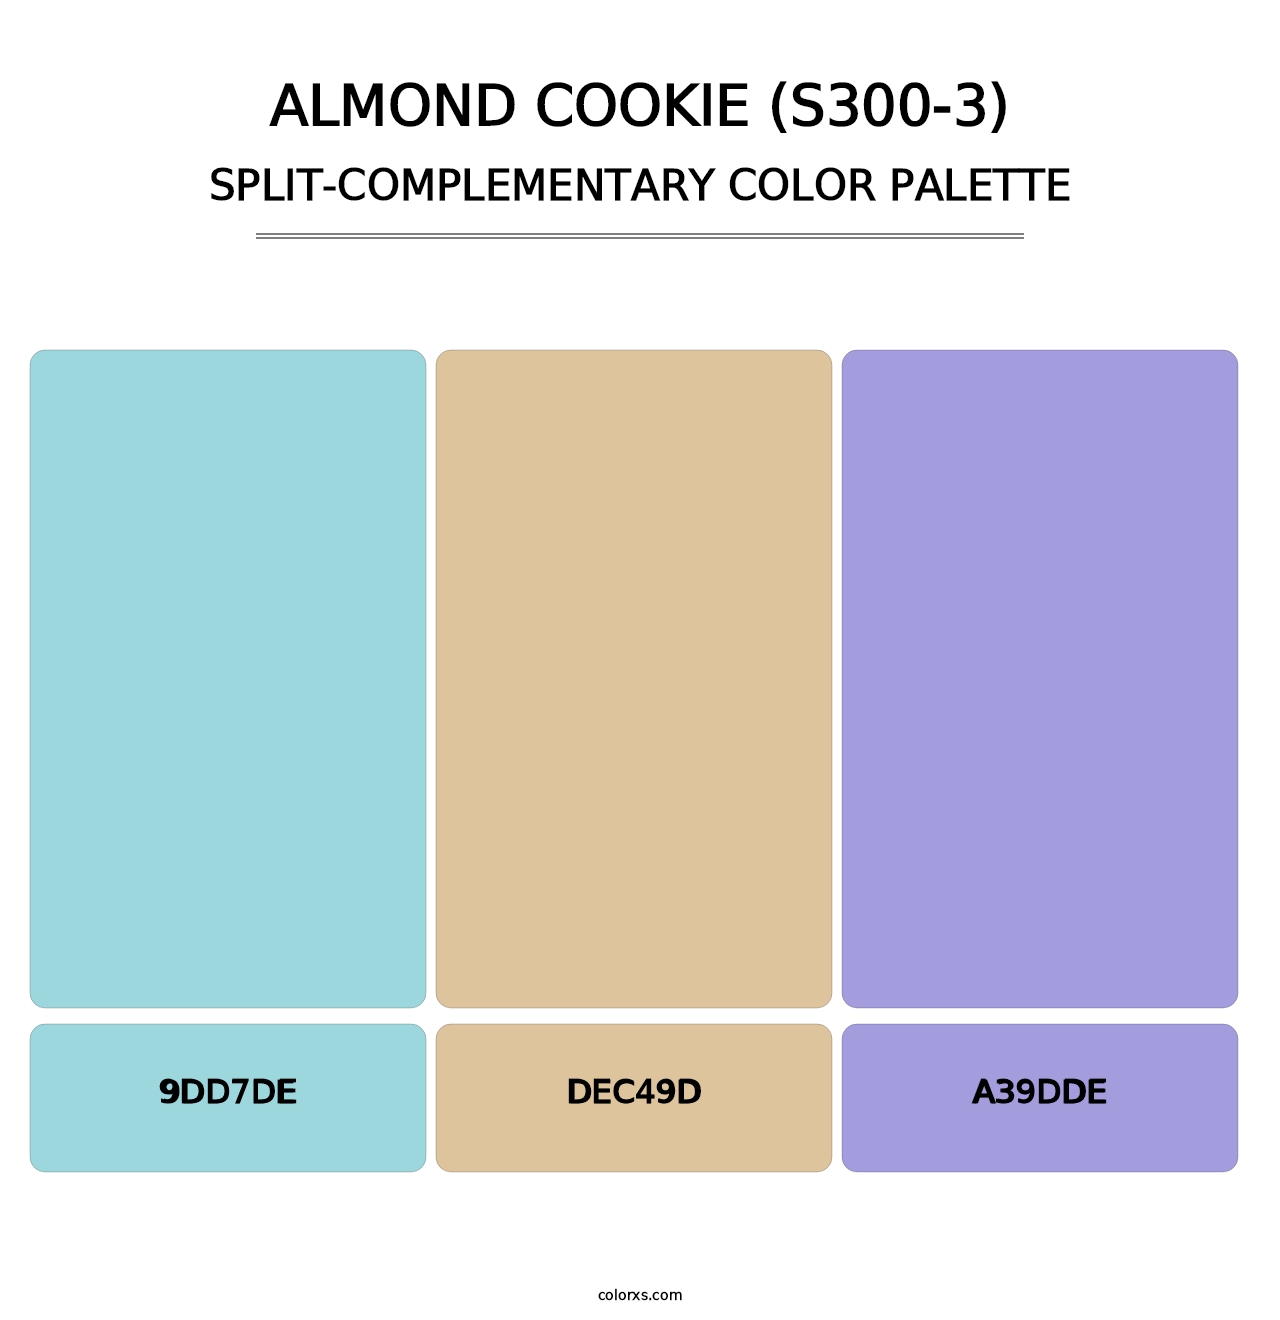 Almond Cookie (S300-3) - Split-Complementary Color Palette